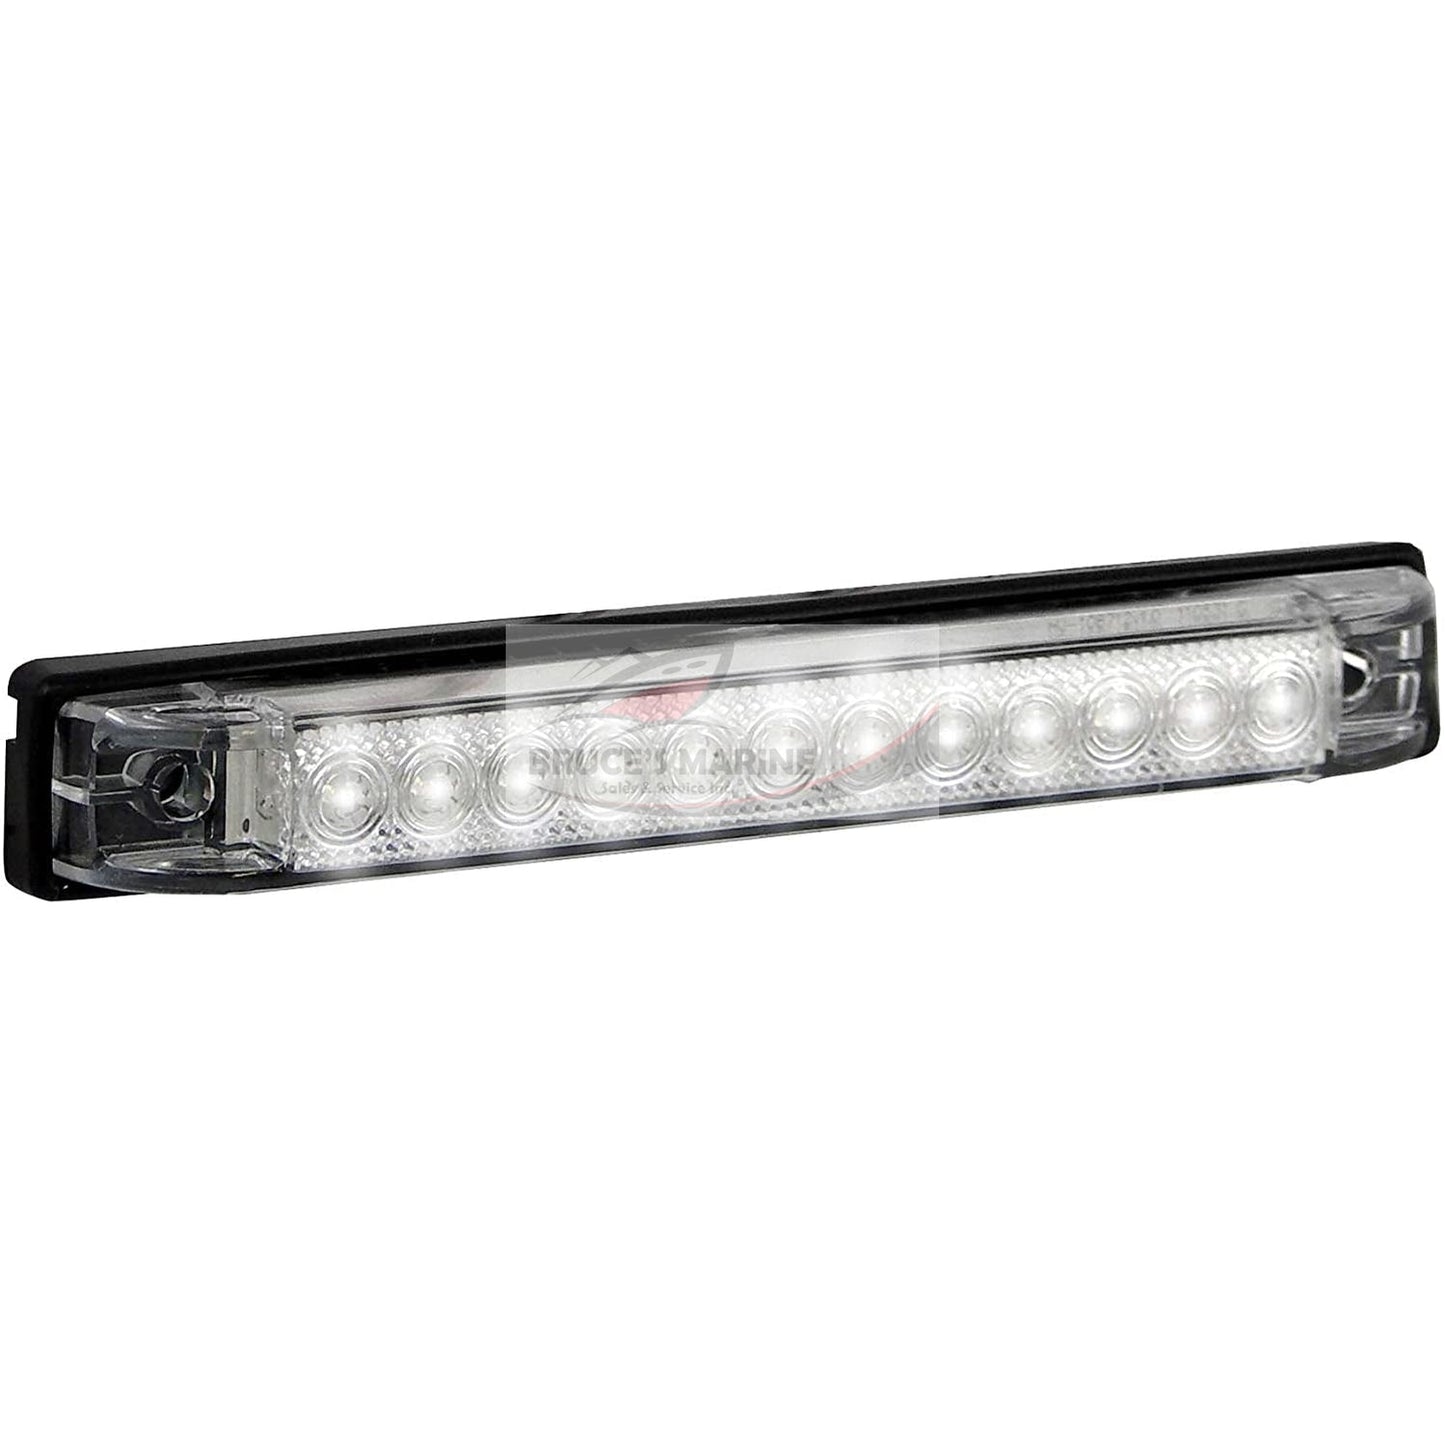 Boater Sports 51605 6 Led Strip Light - White Made by Boater Sports